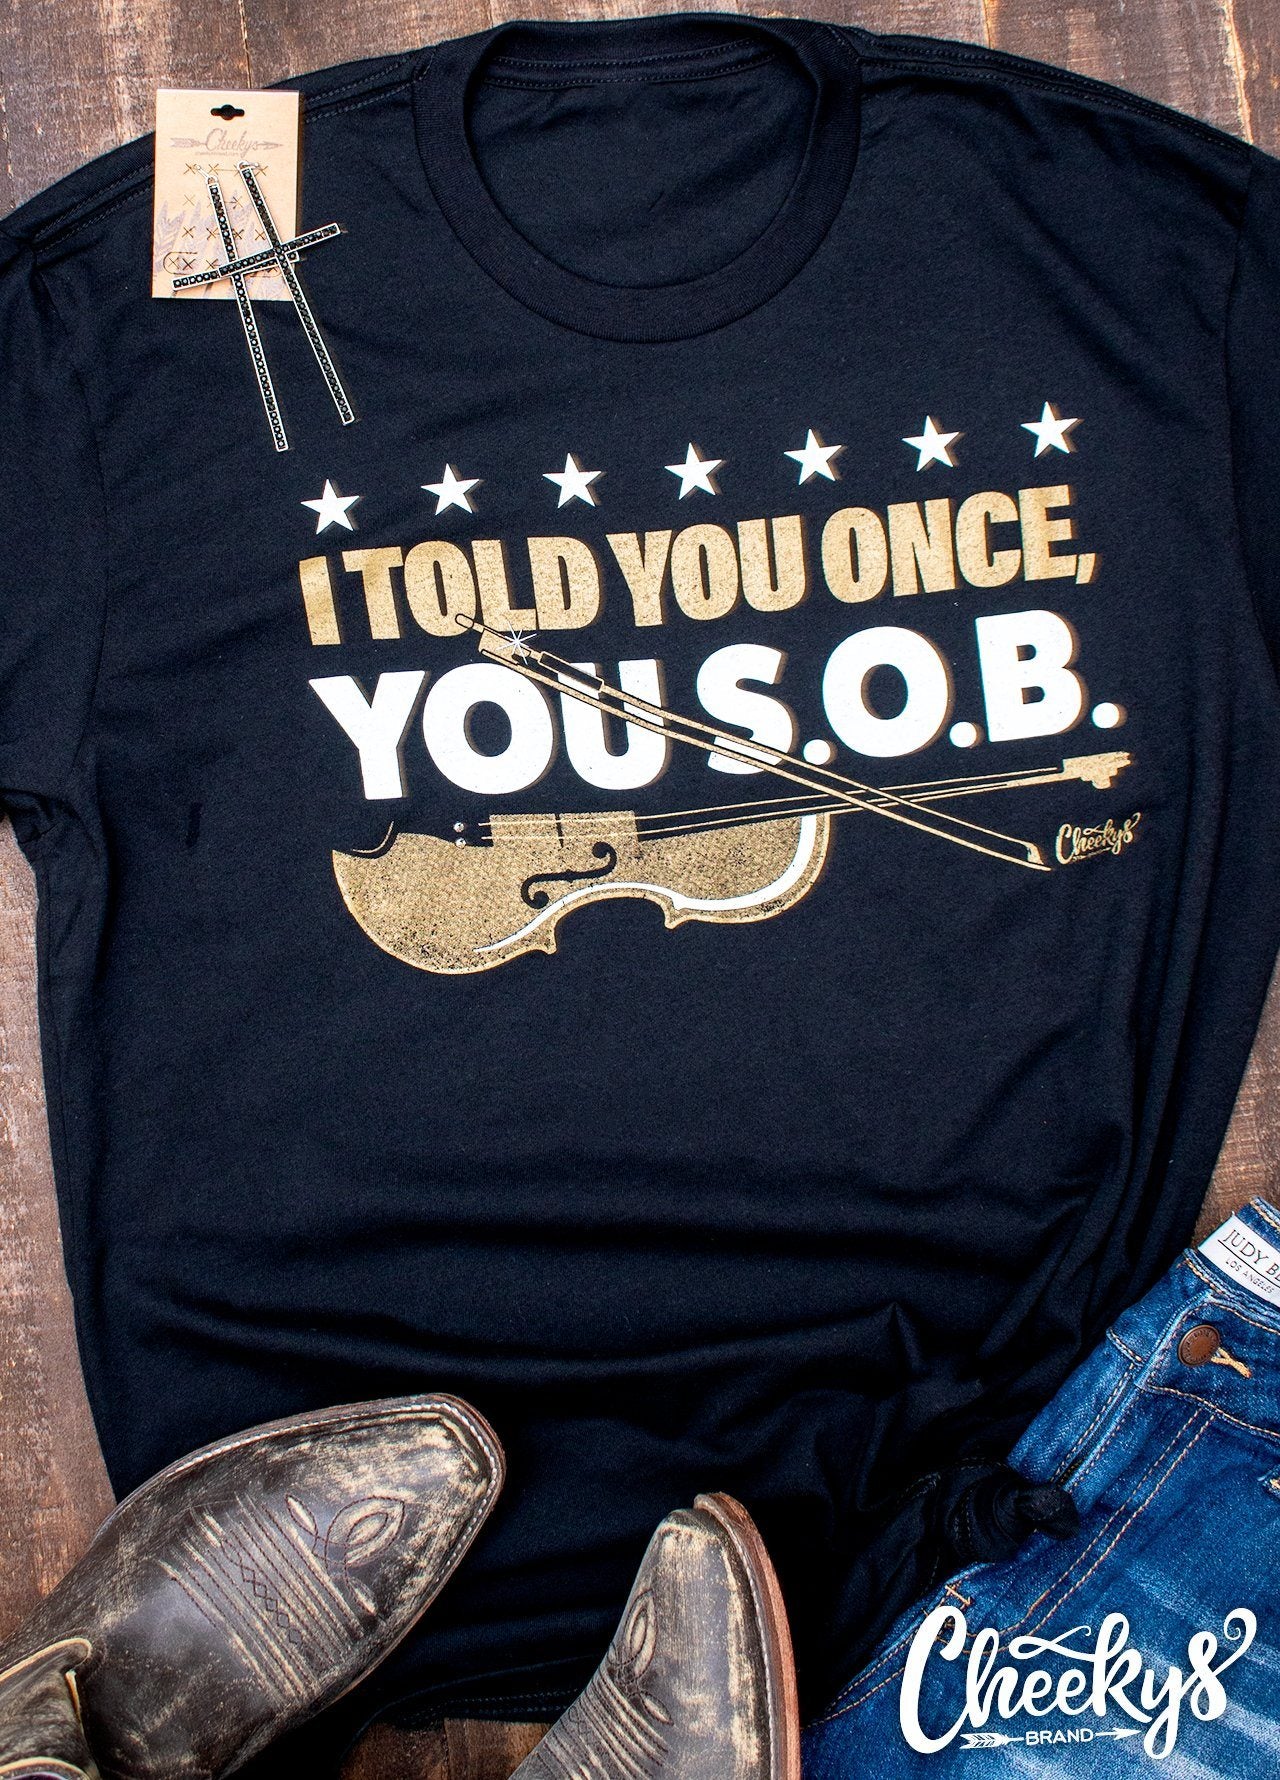 I Told You Once You SOB Black Unisex Tee Cheekys Apparel 38 